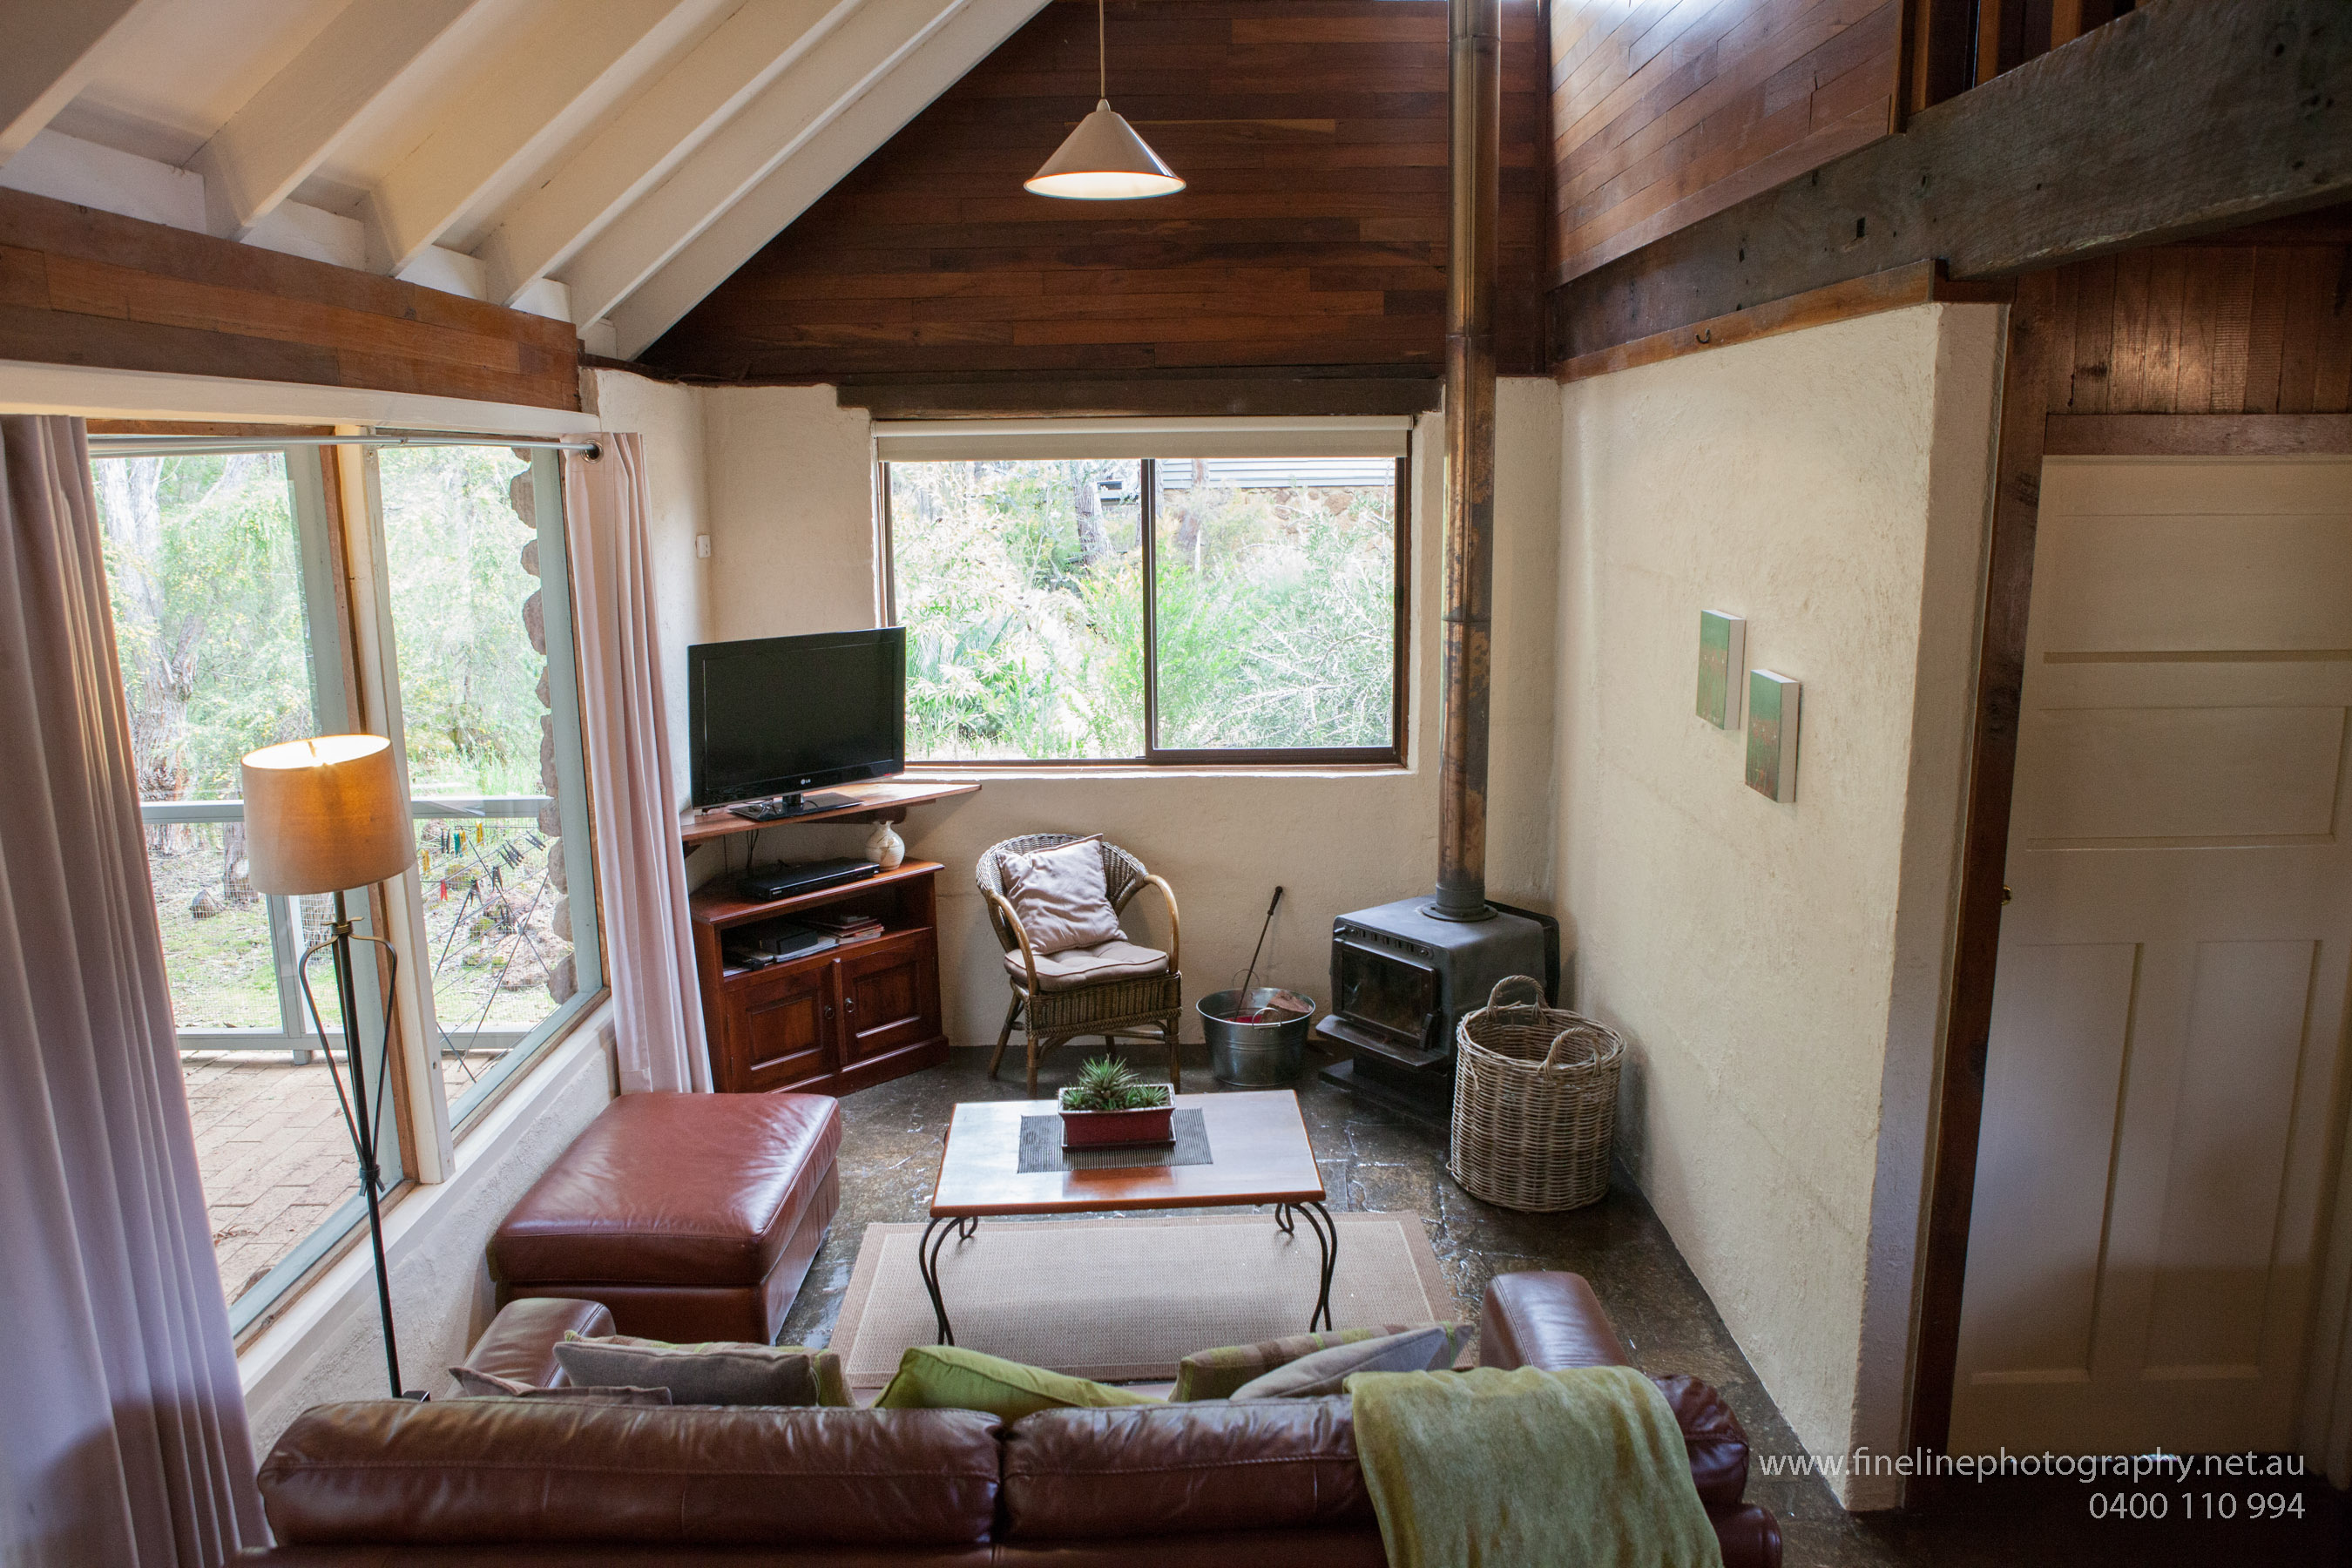 Margaret River Stone Cottages - New South Wales Tourism 